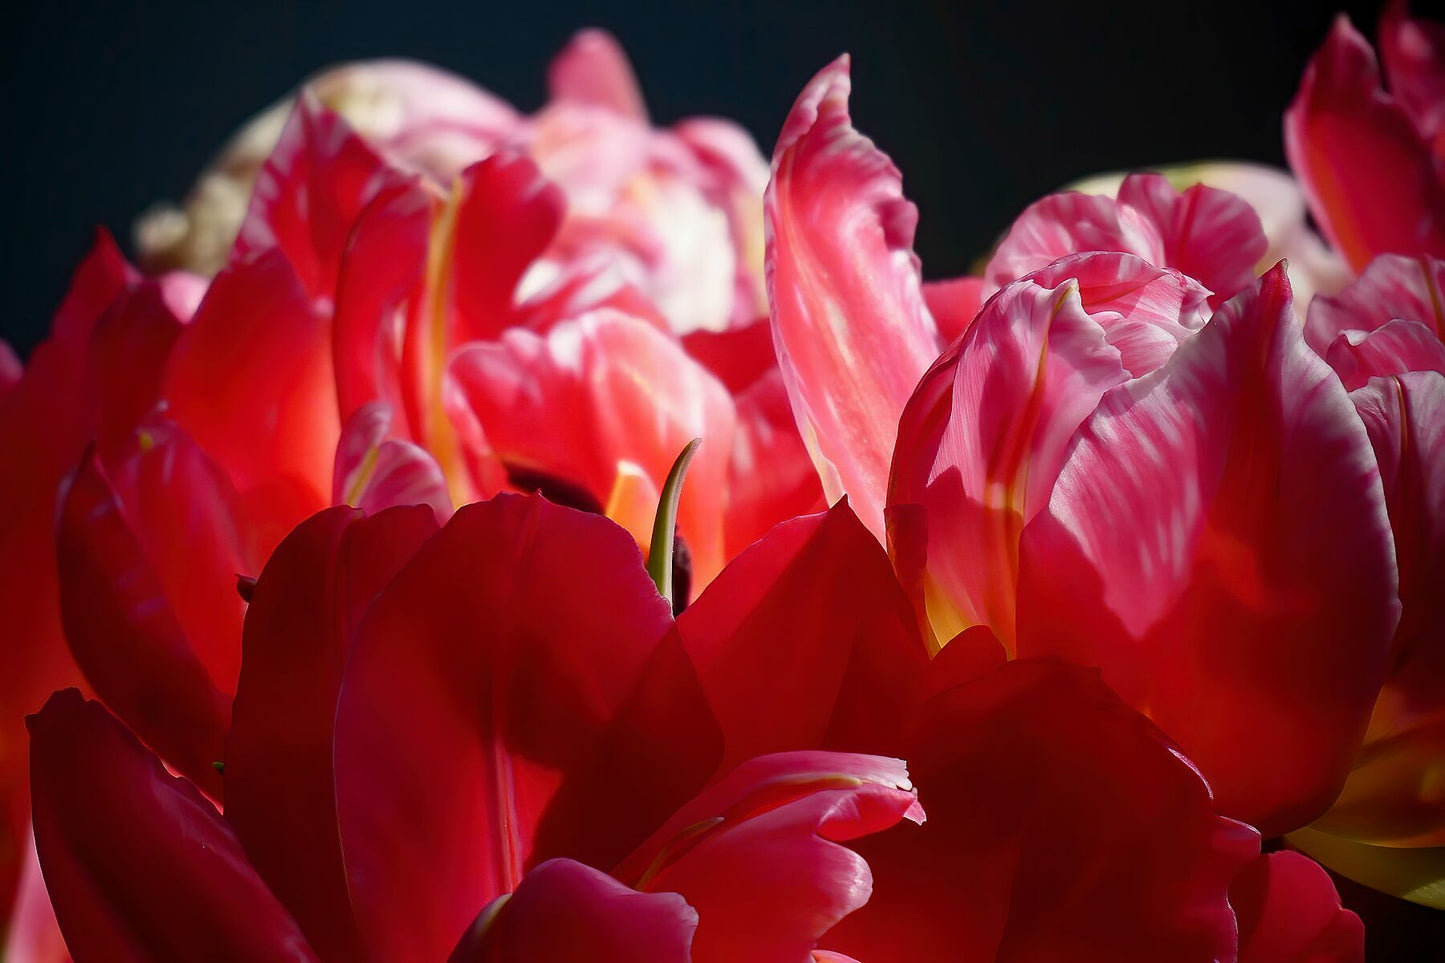 Red Parrot Tulips close up II